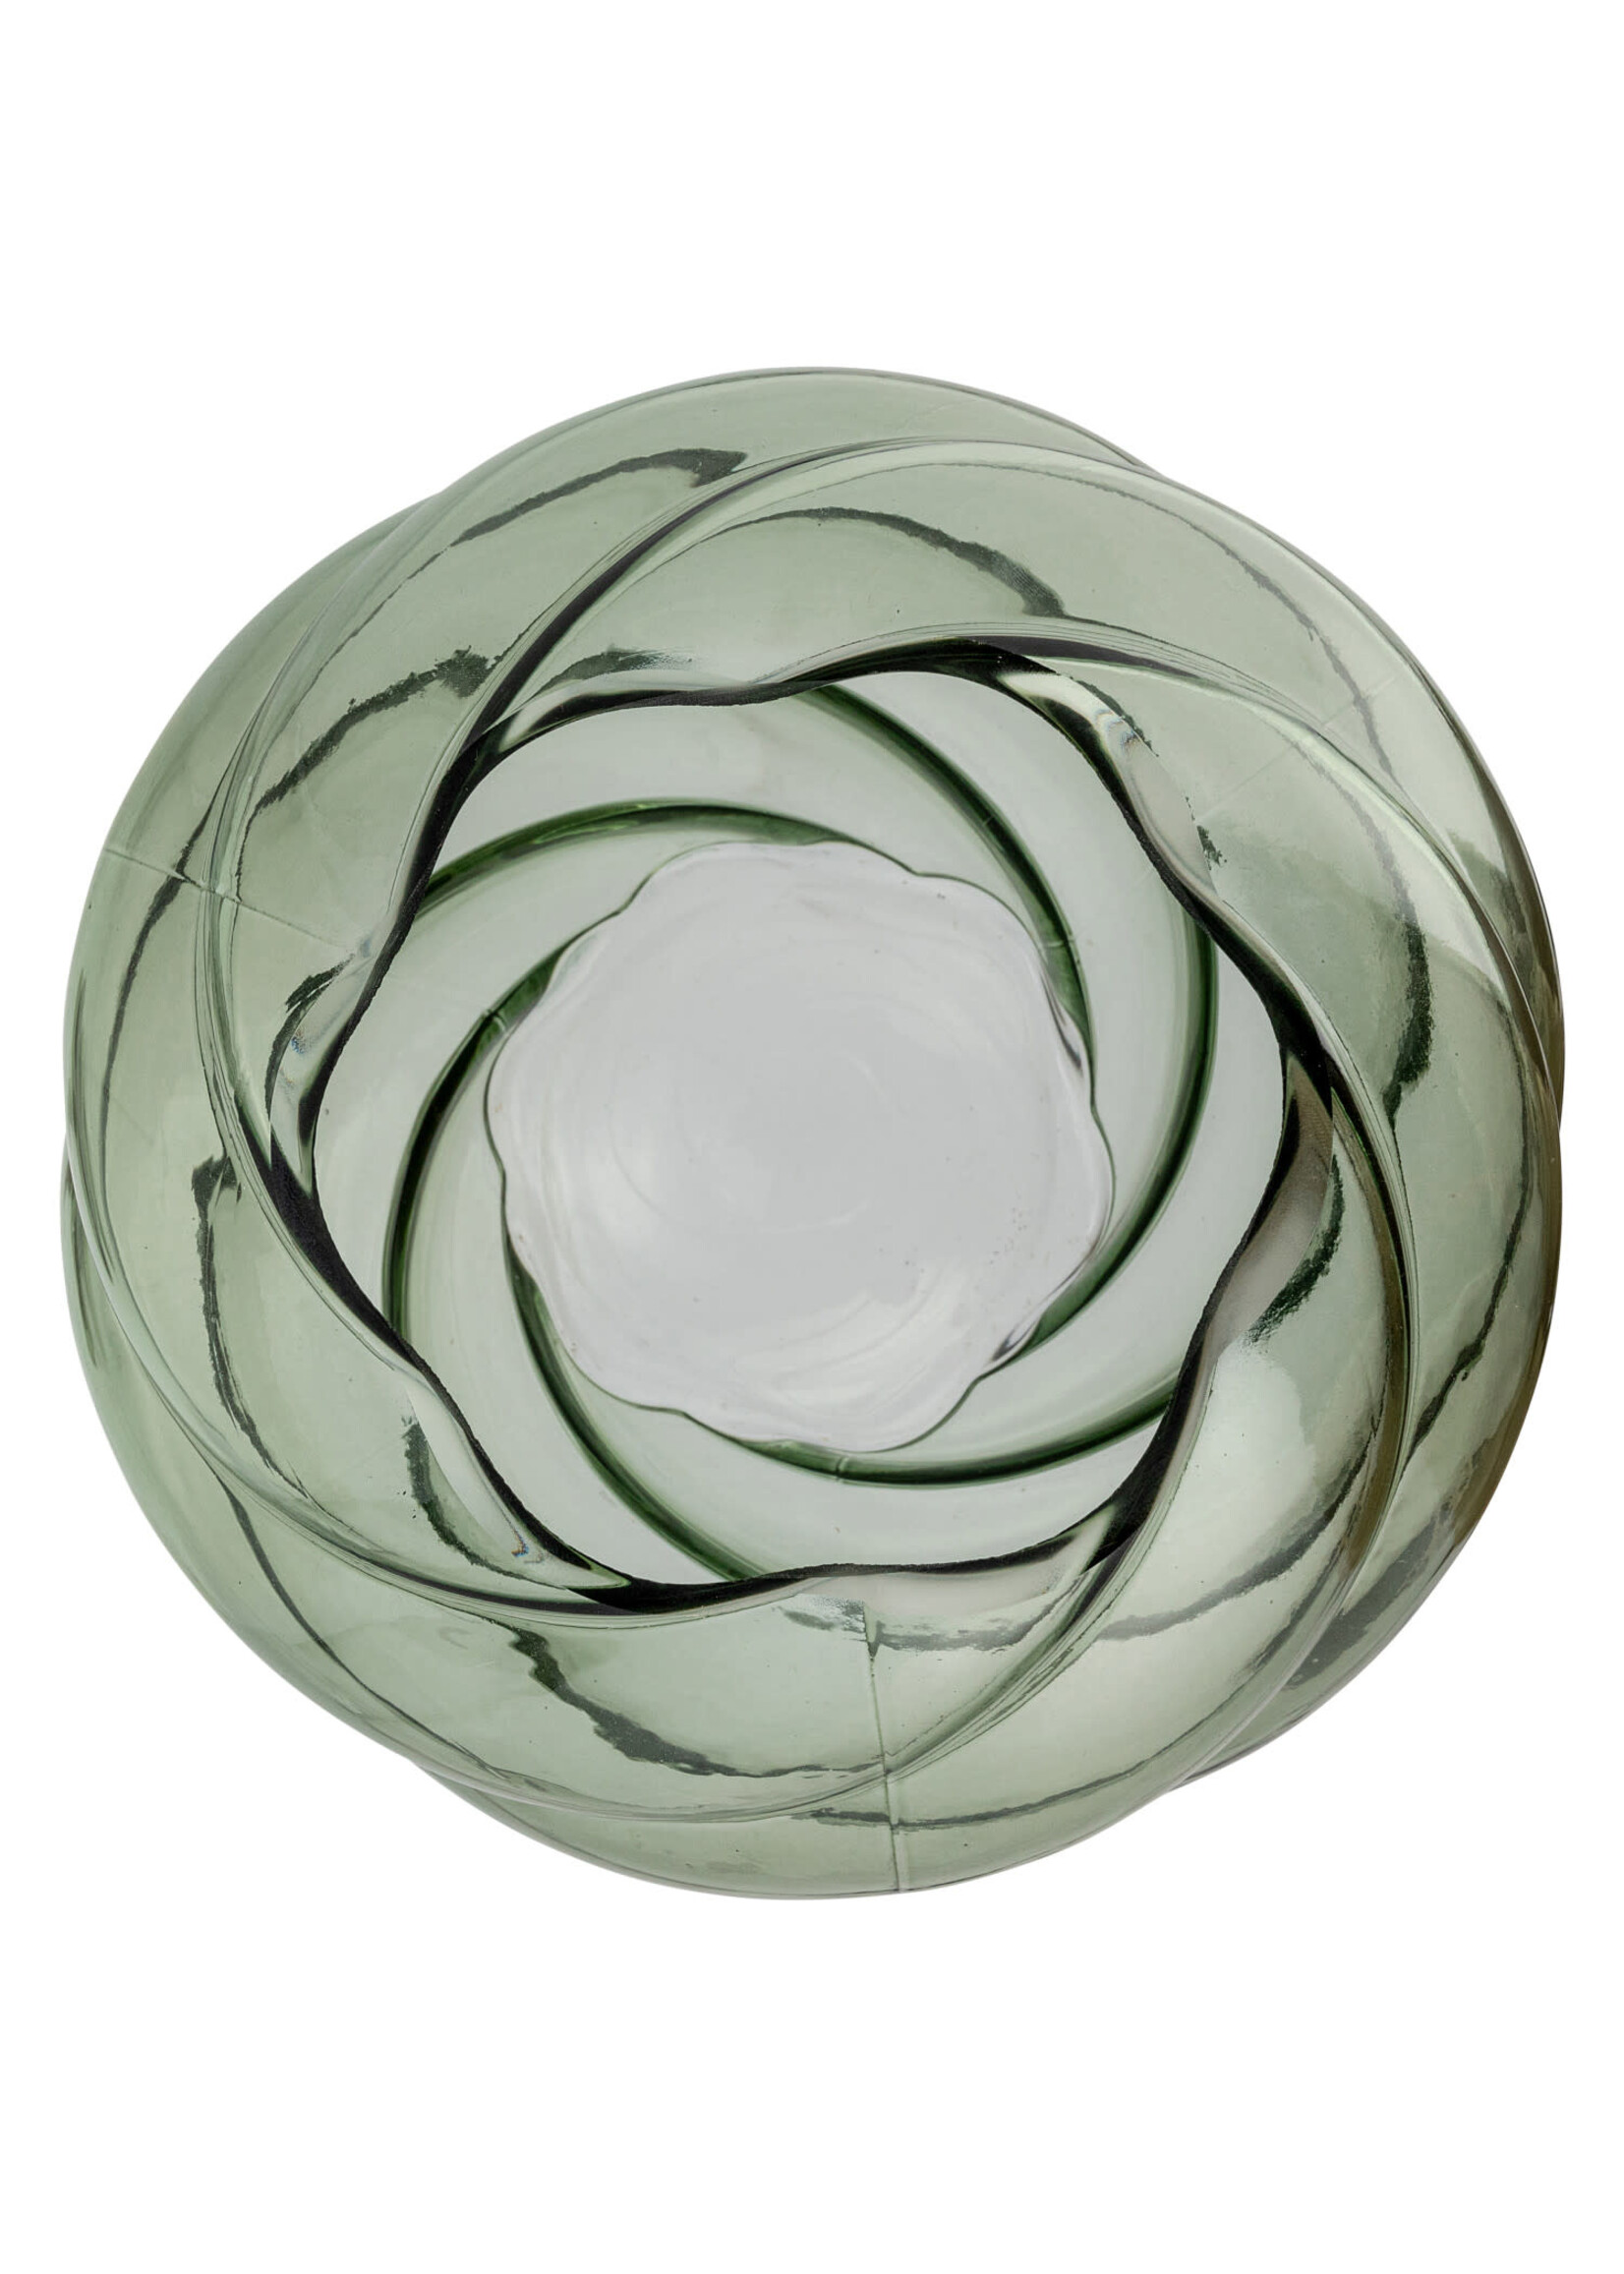 Twisted Glass Vase, Green 7-3/4" Round x 7-1/4"H